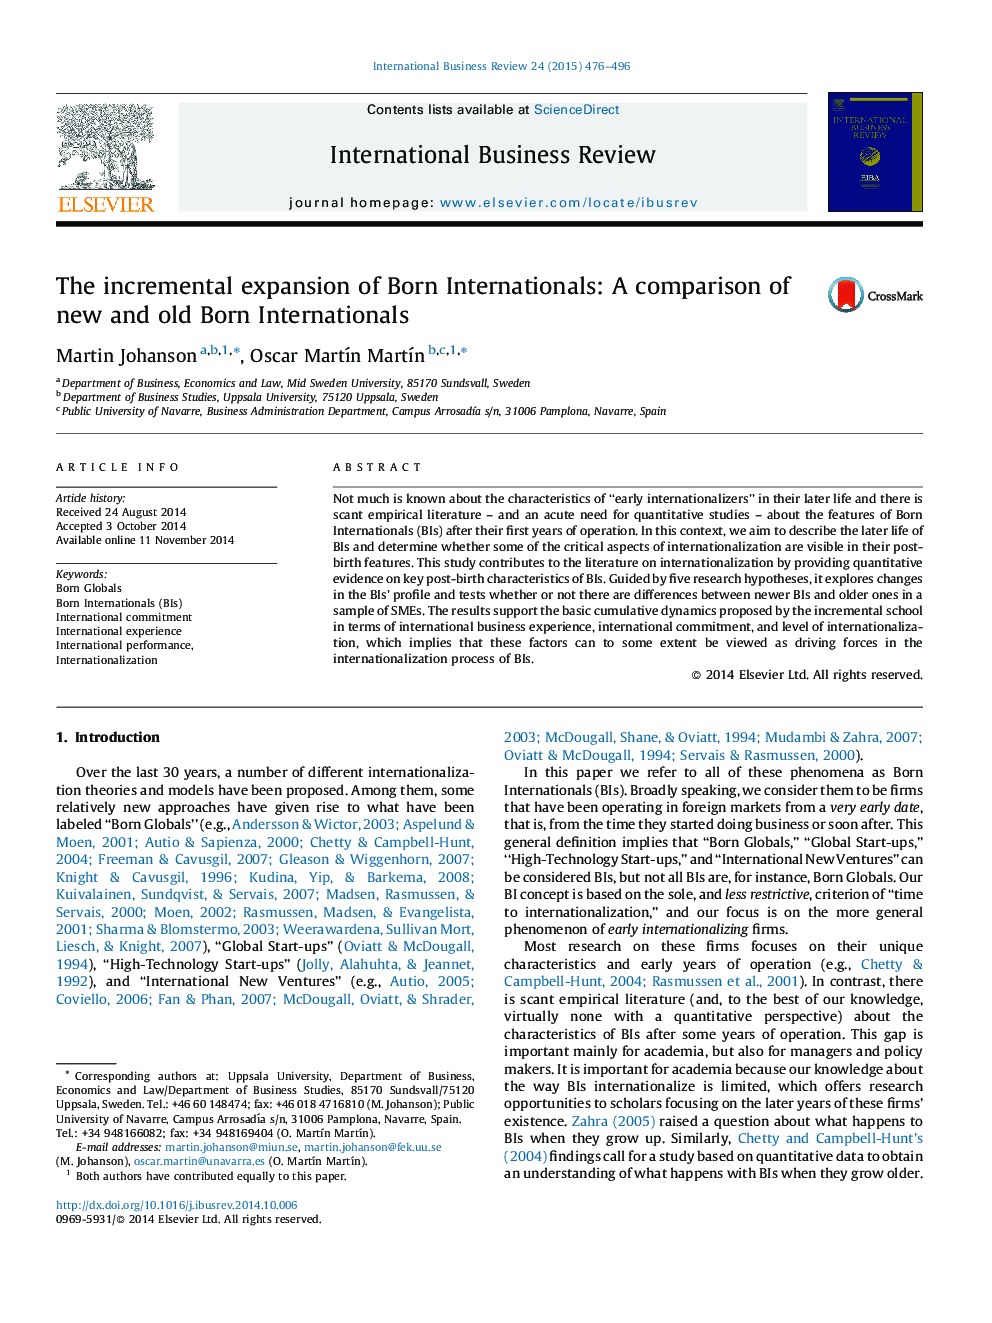 The incremental expansion of Born Internationals: A comparison of new and old Born Internationals